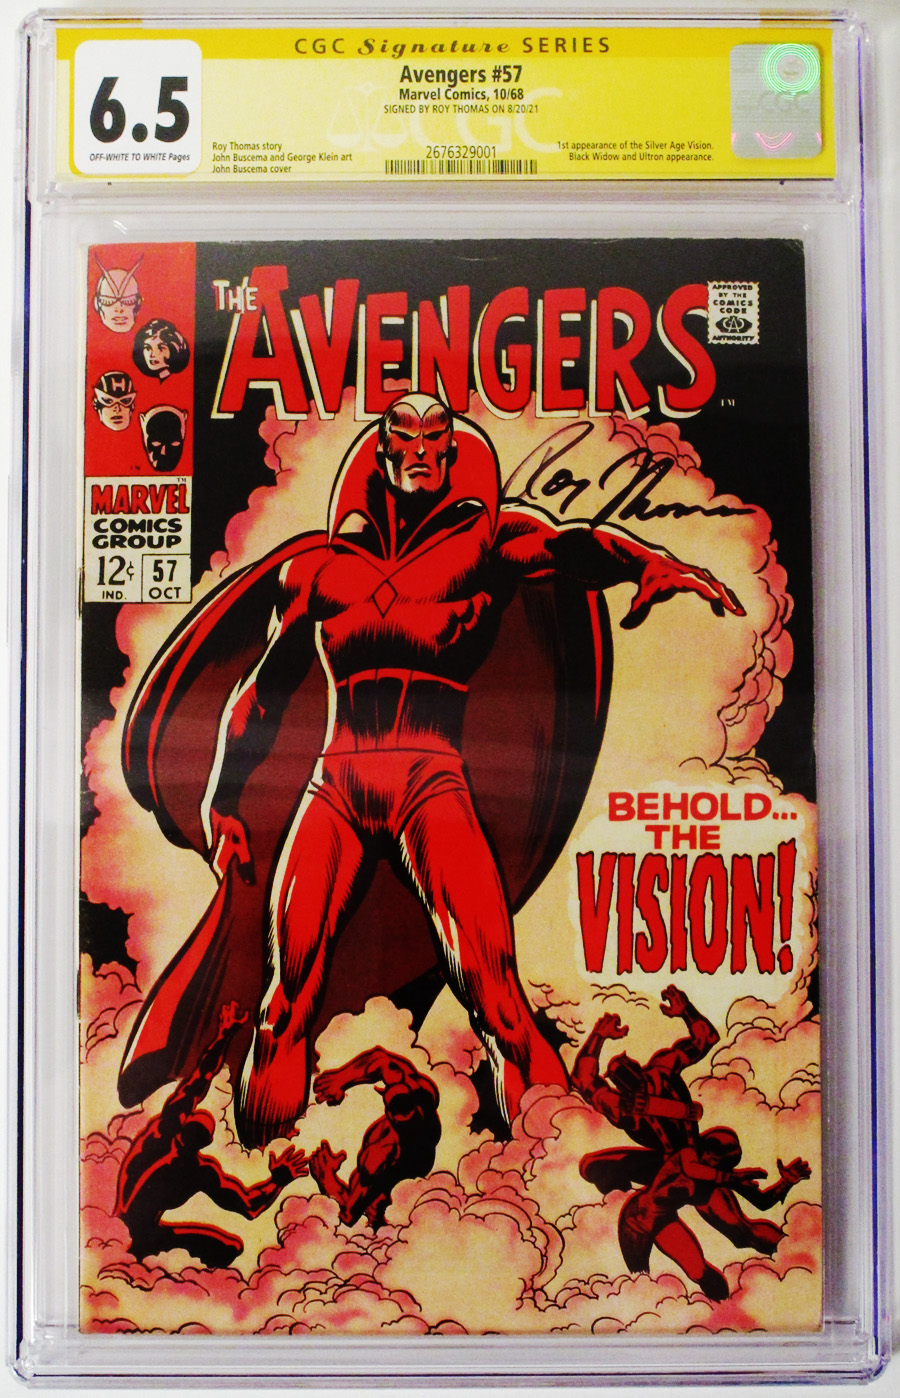 Avengers #57 Cover D CGC 6.5 Signature Series Signed by Roy Thomas